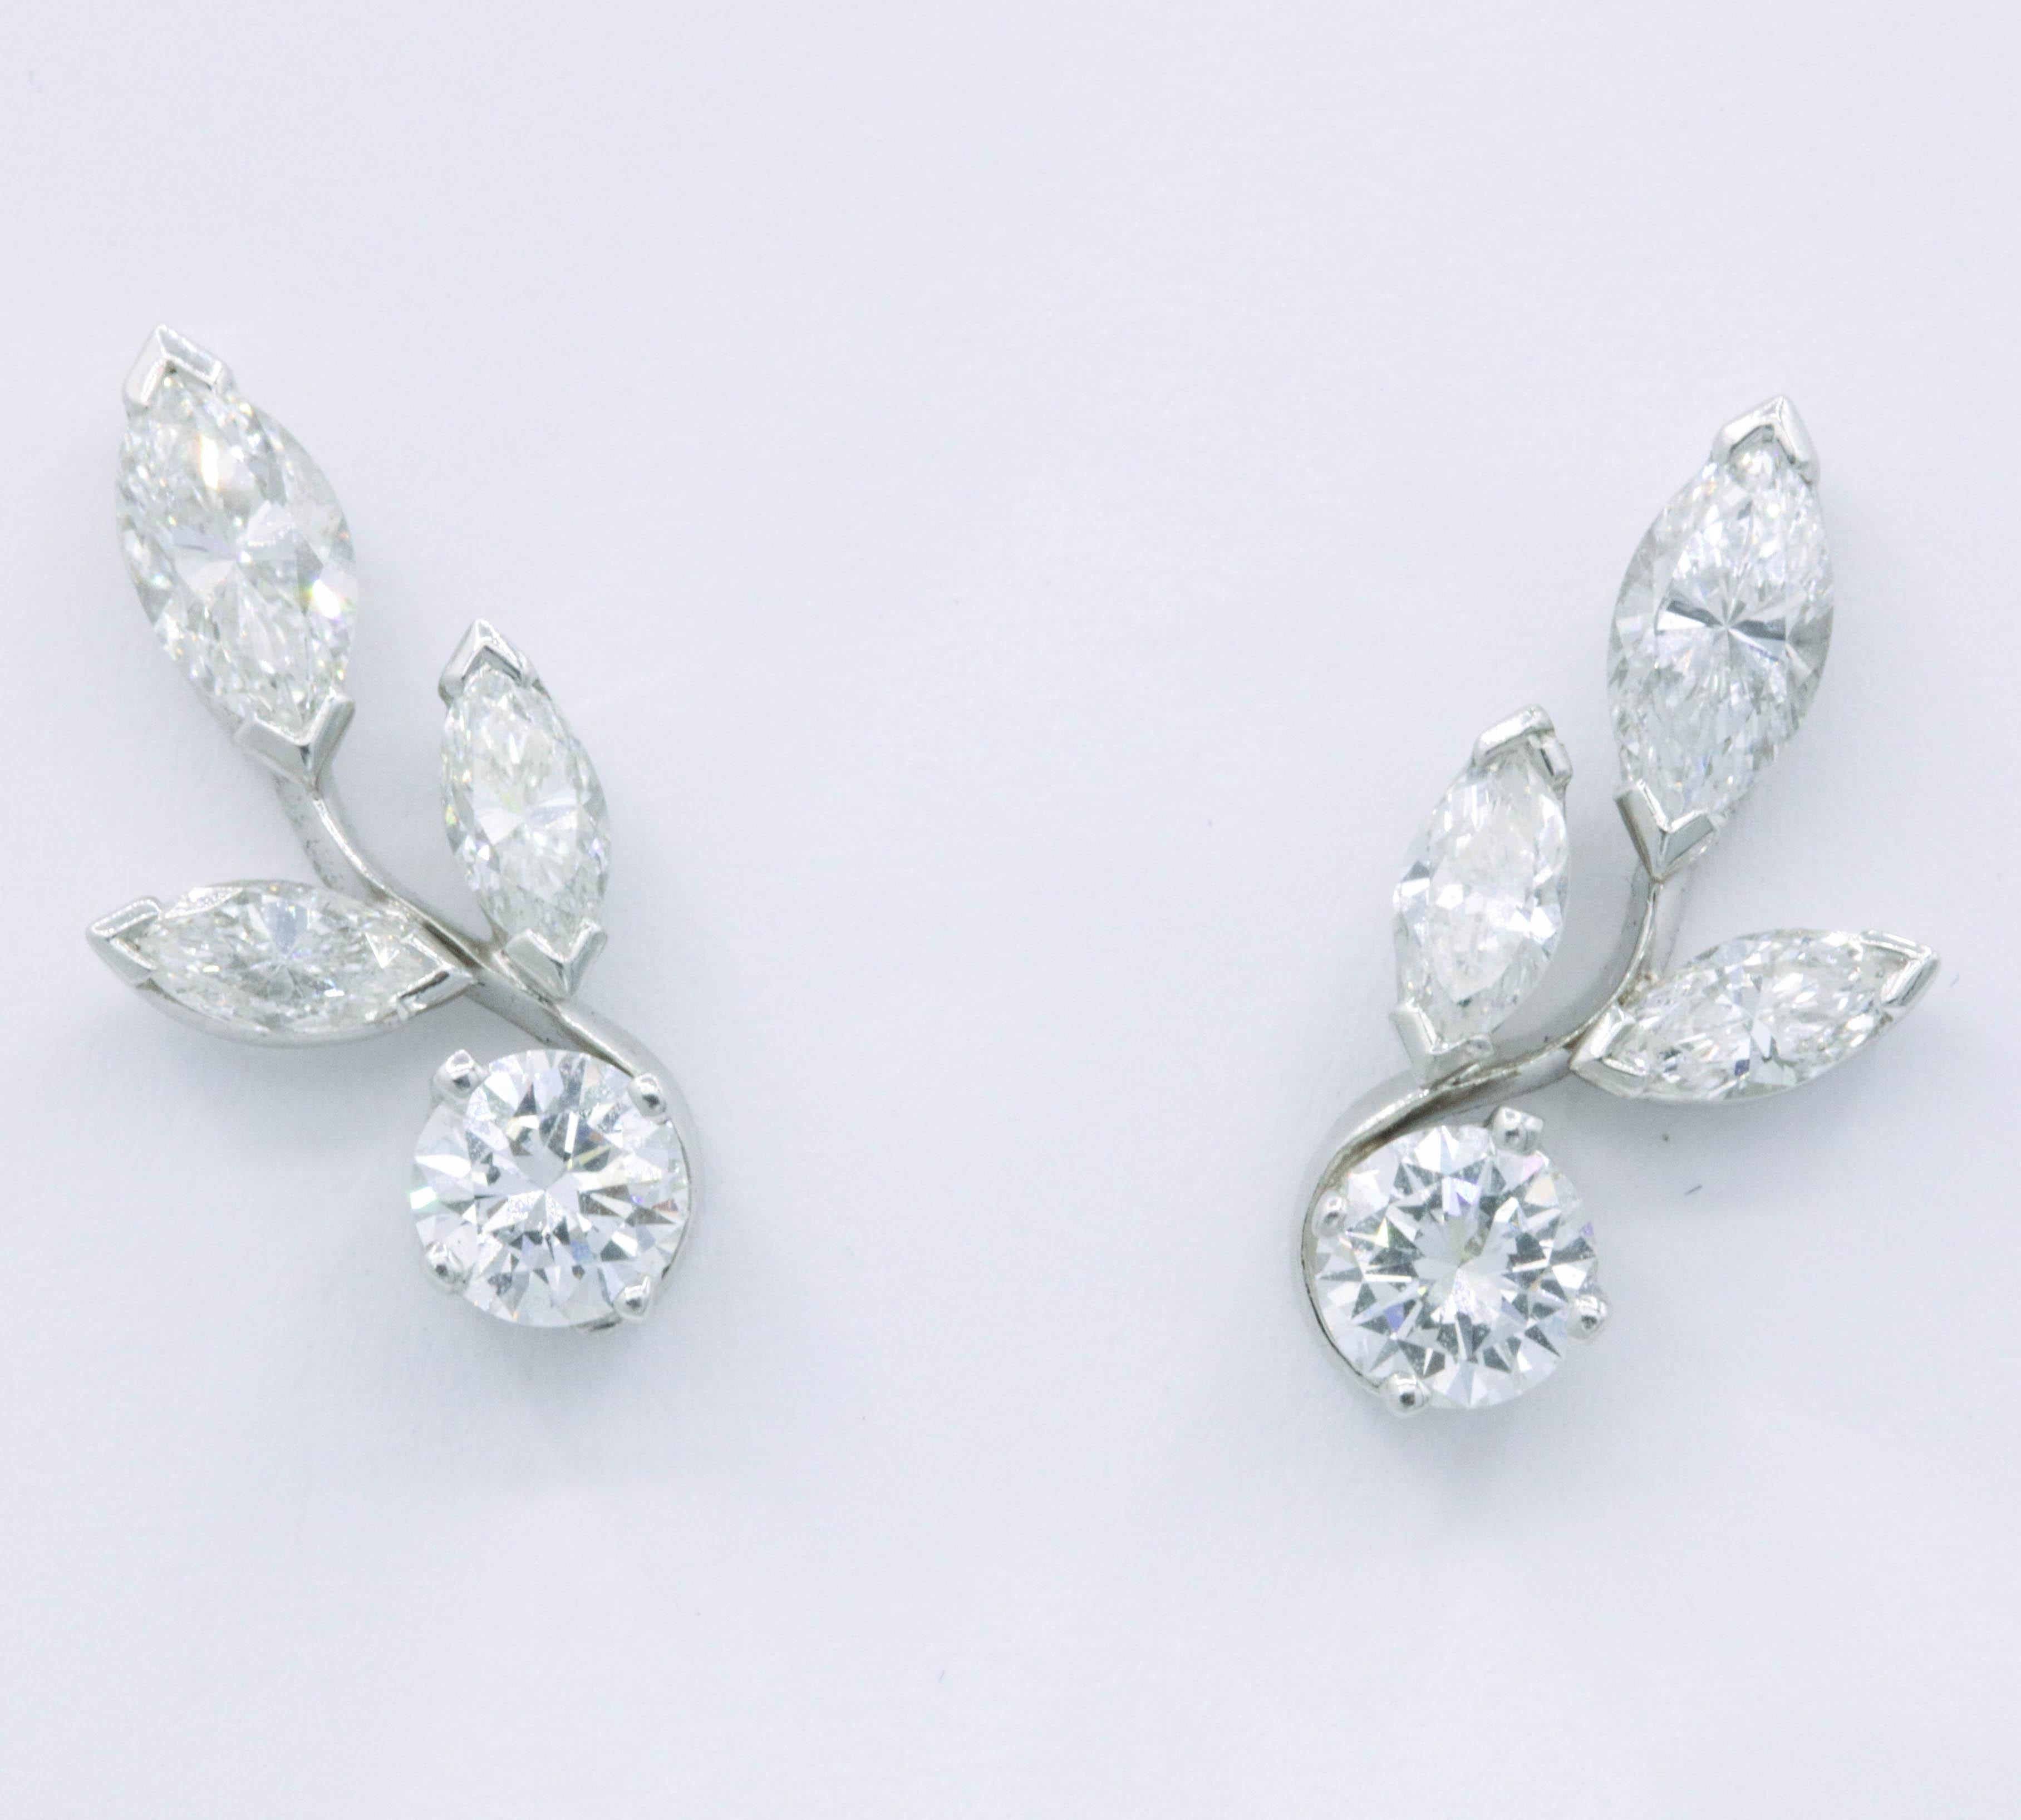 Platinum diamond earring climbers featuring 2 round brilliants, 0.70 cts, and 6 marquise diamonds weighing 1.00 cts. 
A very sweet pair to have in your collection!